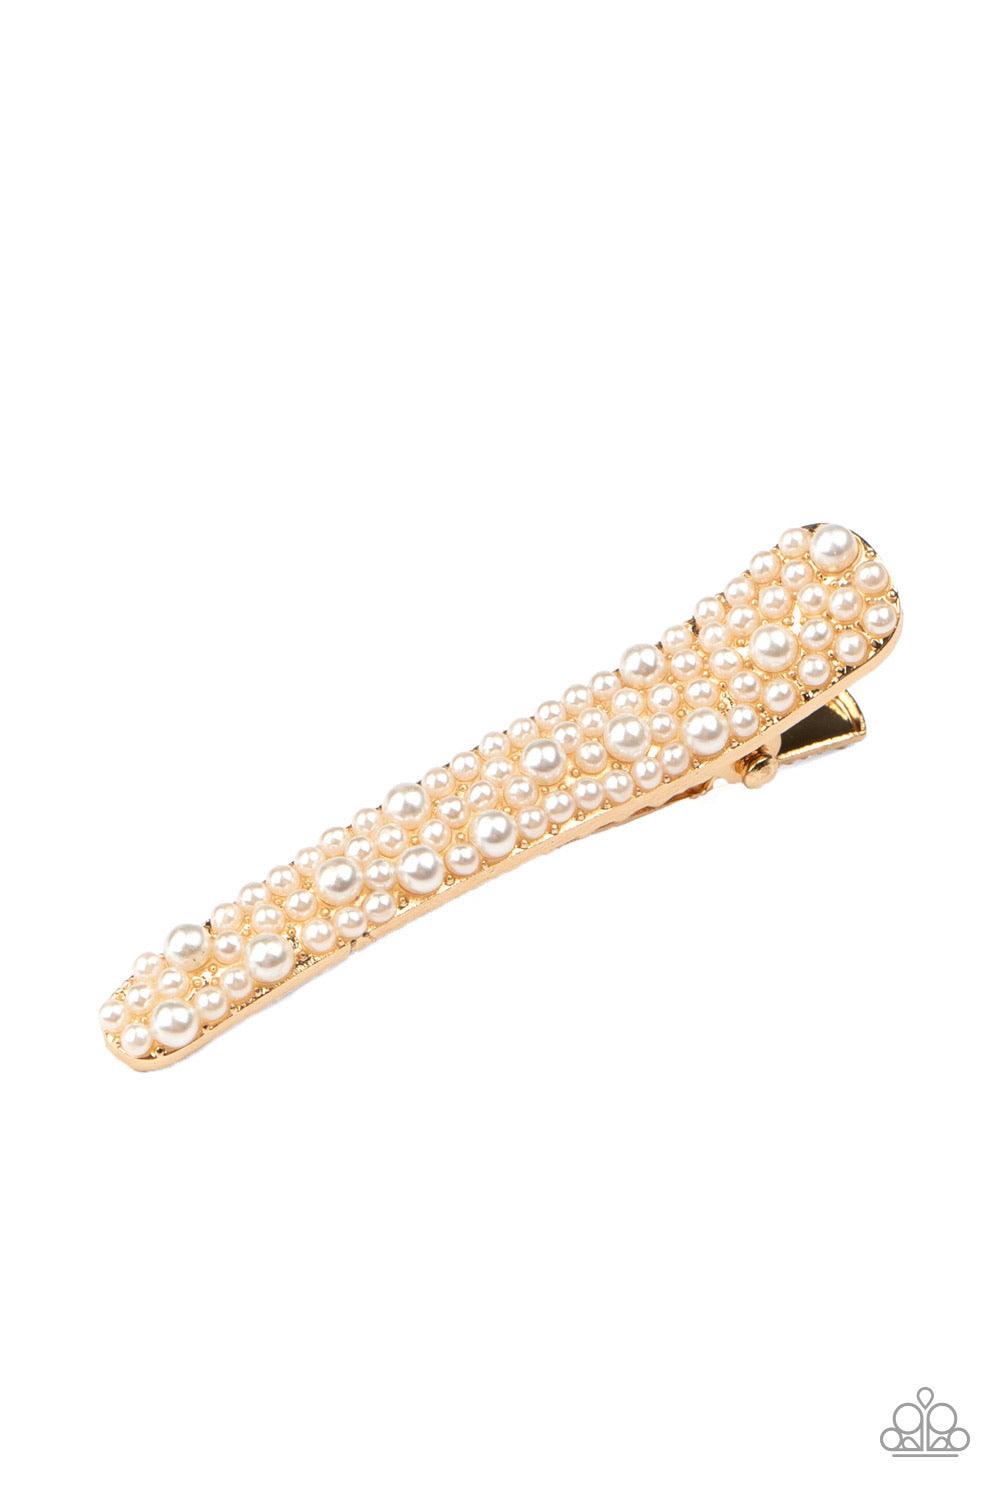 Paparazzi Accessories Wish You Were HAIR ~Gold Varying in size, dainty white pearls adorn the front of a glistening gold frame for a timeless look. Features a standard hair clip. Sold as one individual hair clip.